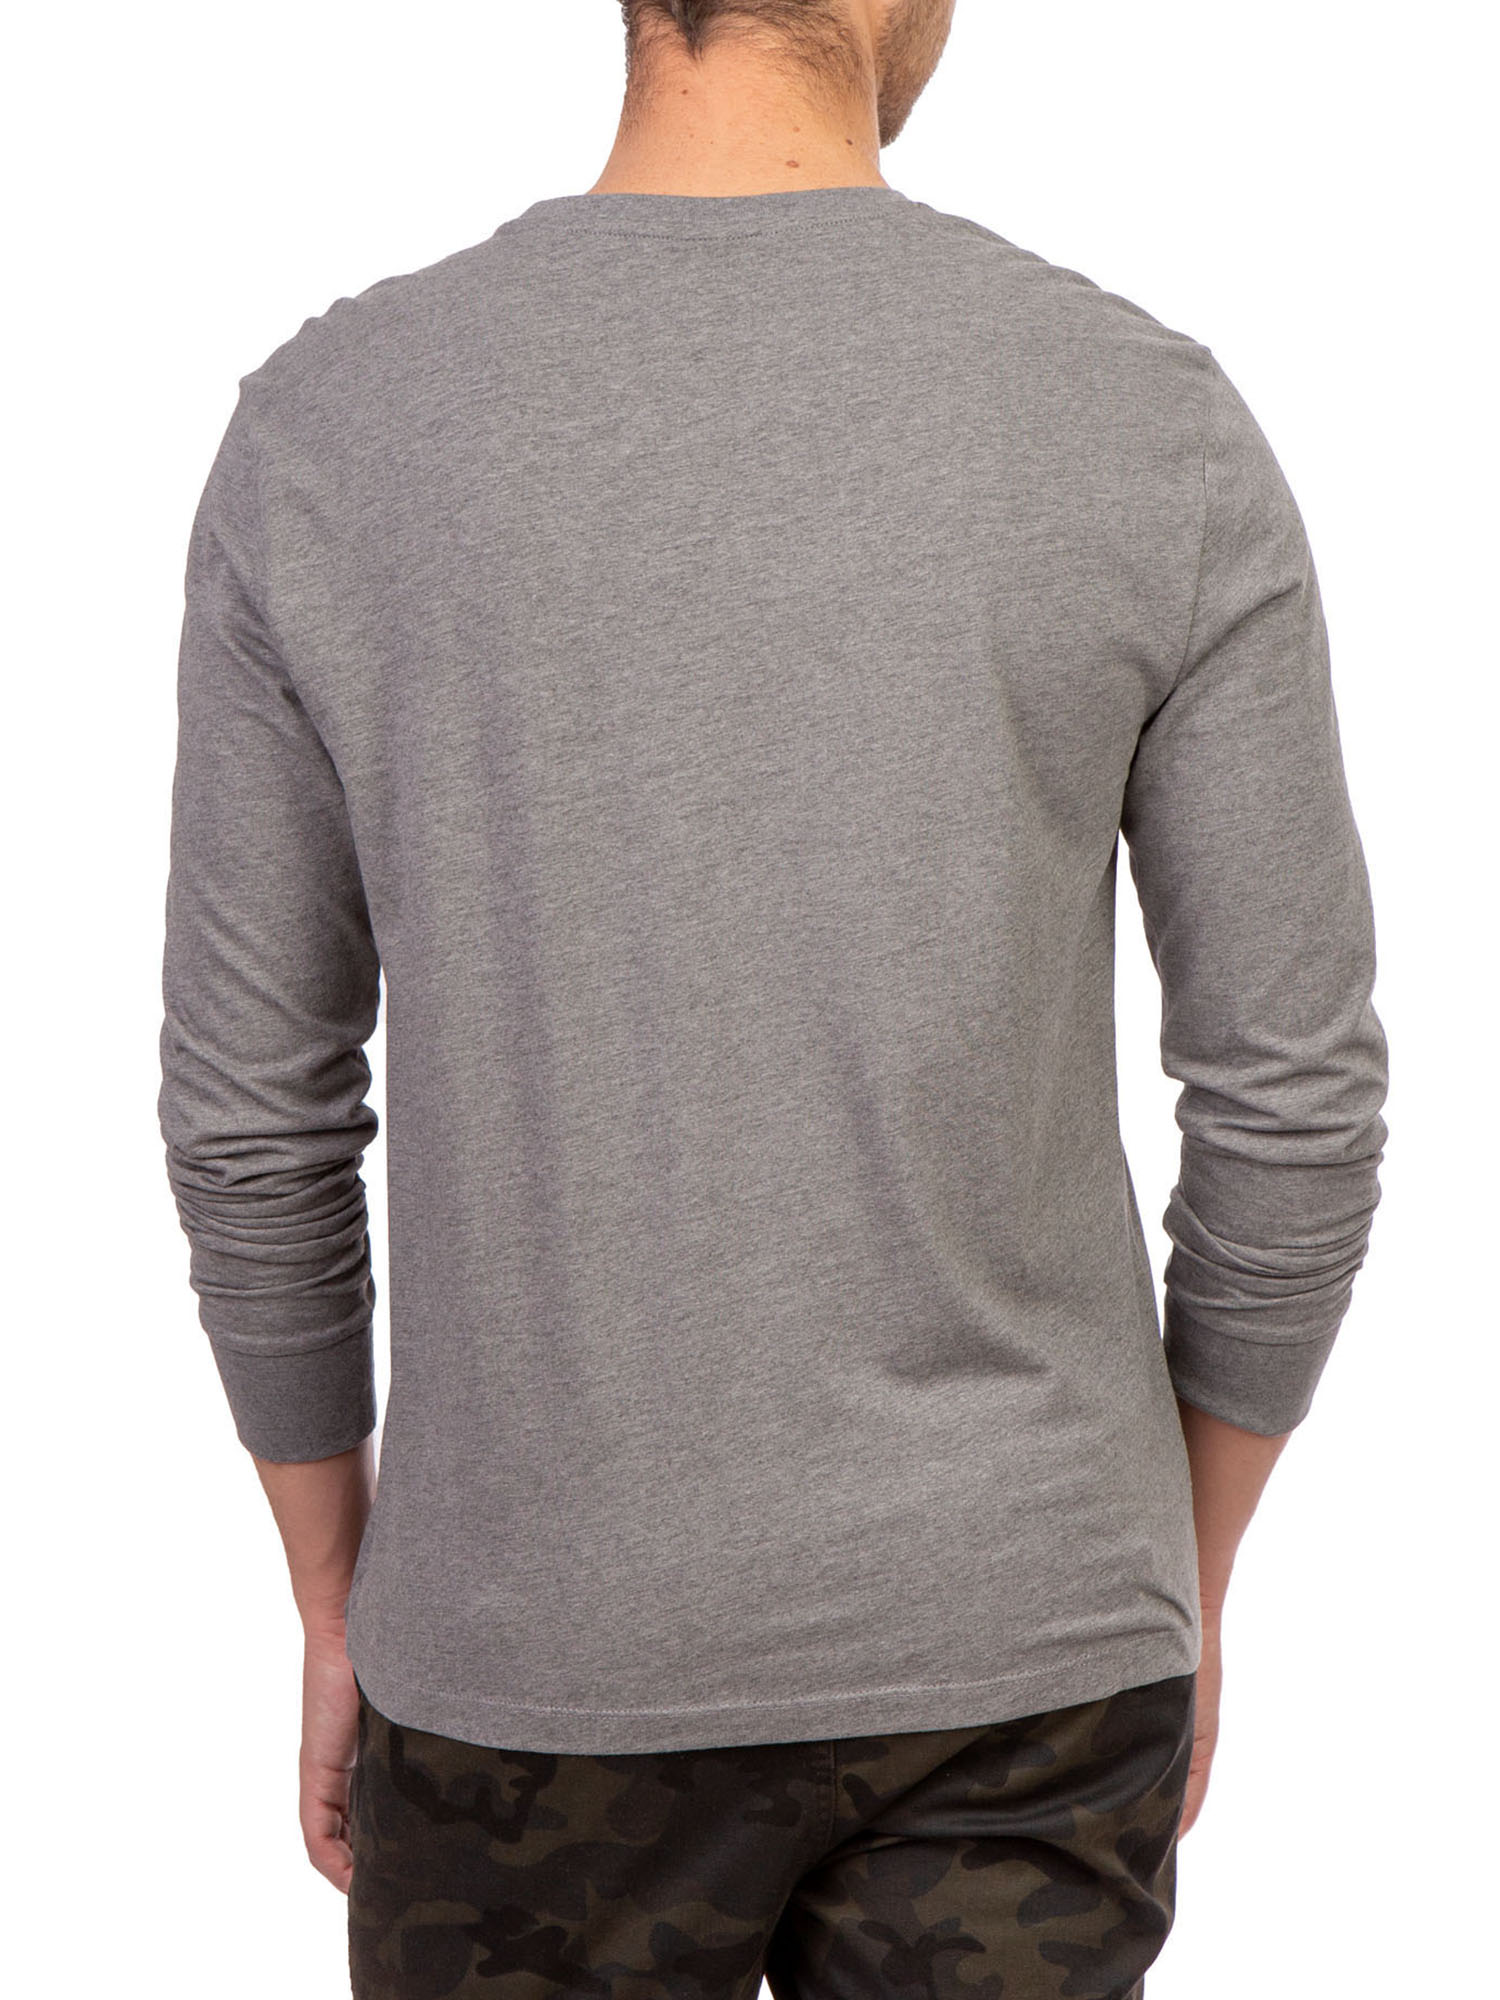 U.S. Polo Assn. Men's Long Sleeve Solid T-Shirt - image 4 of 4